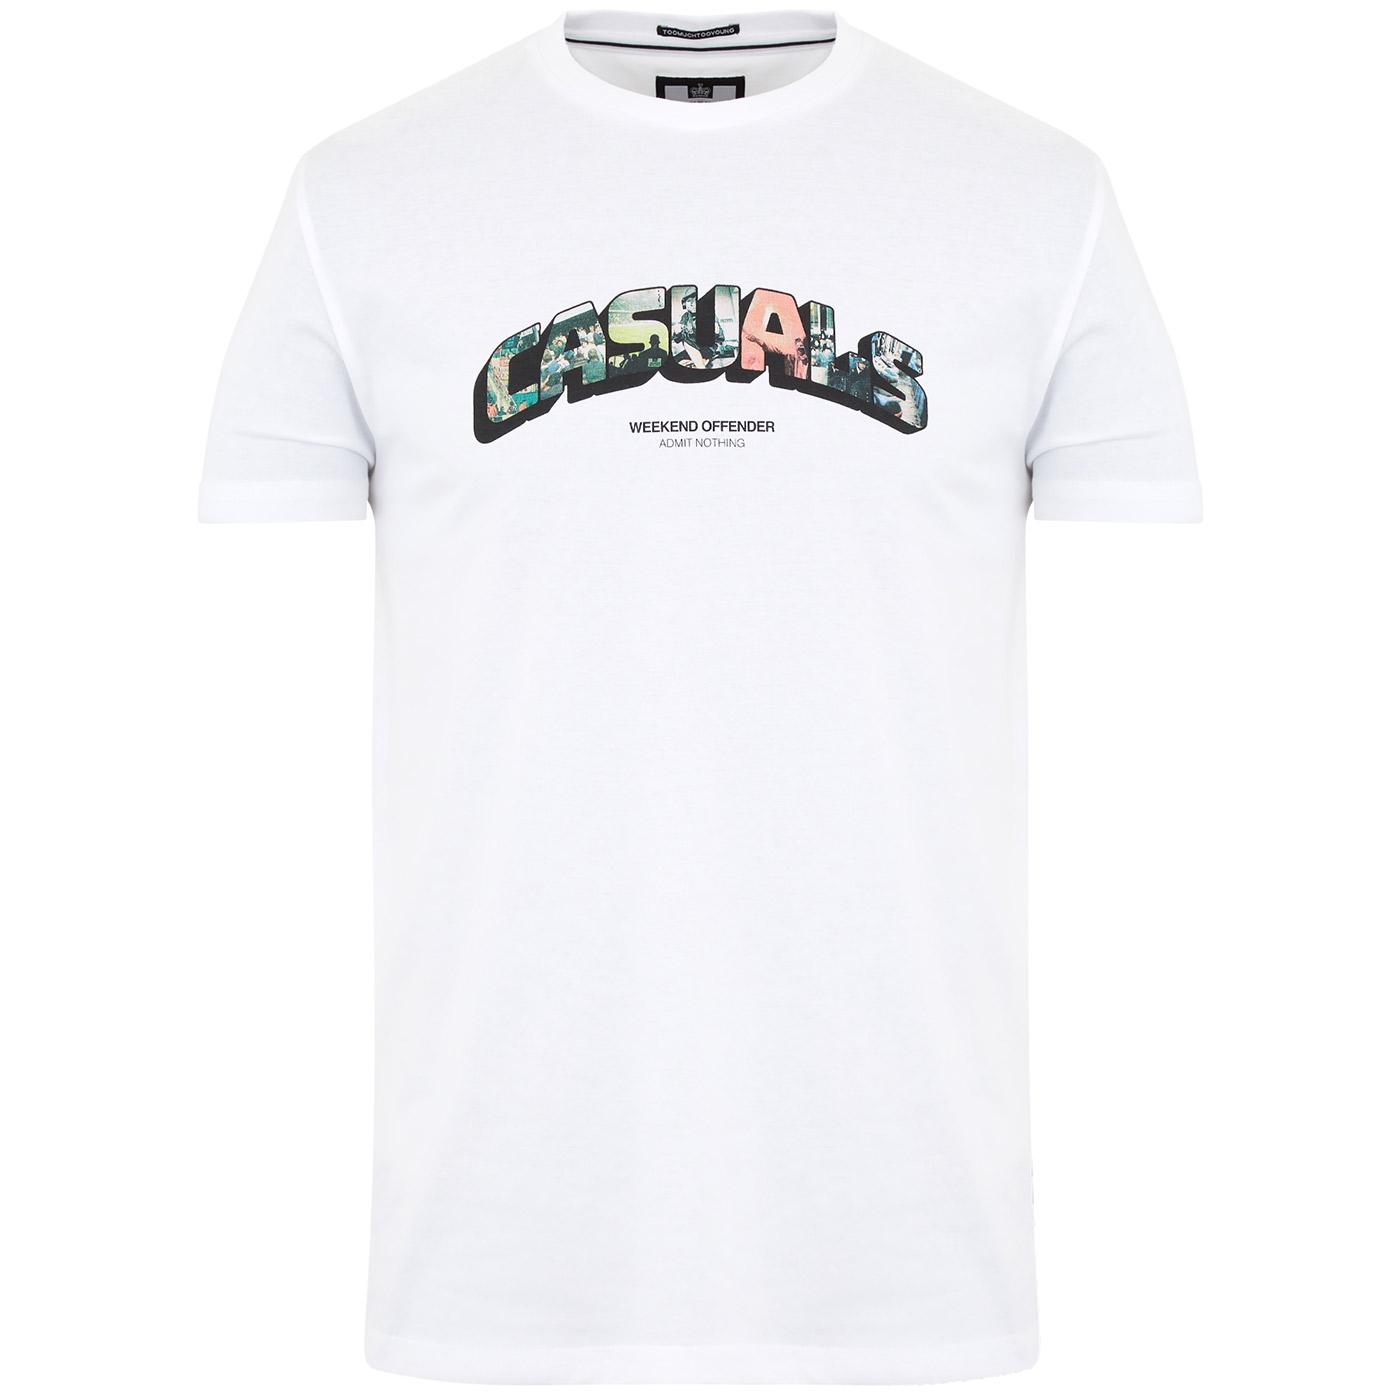 Saturday WEEKEND OFFENDER Retro Casuals Tee (W)